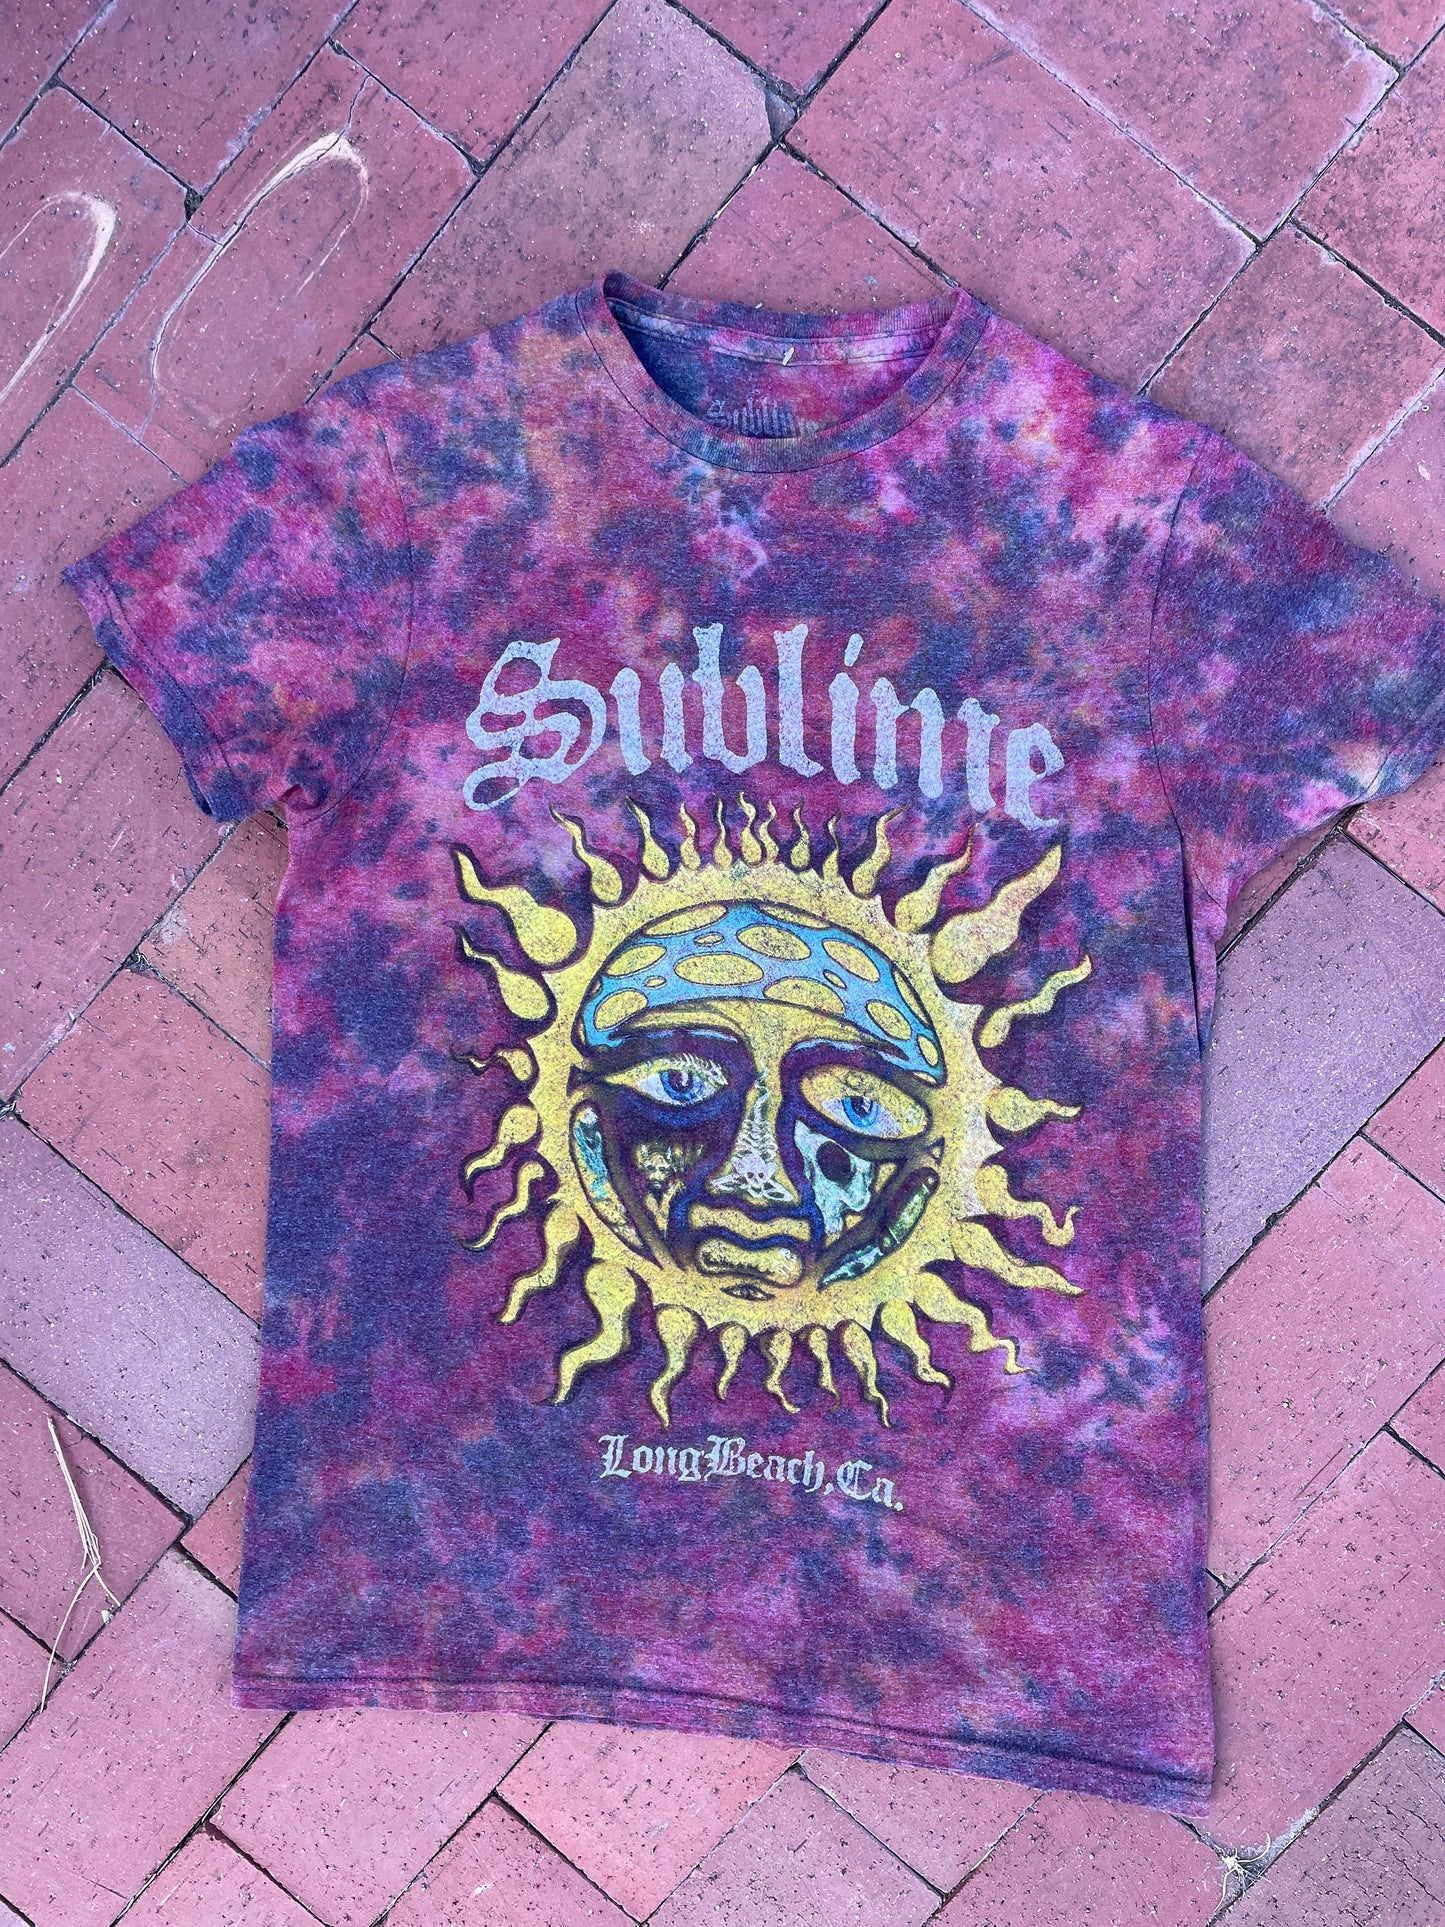 SMALL Women's Sublime Handmade Reverse Tie Dye Short Sleeve T-Shirt | One-Of-a-Kind Upcycled Black and Red Crumpled Top